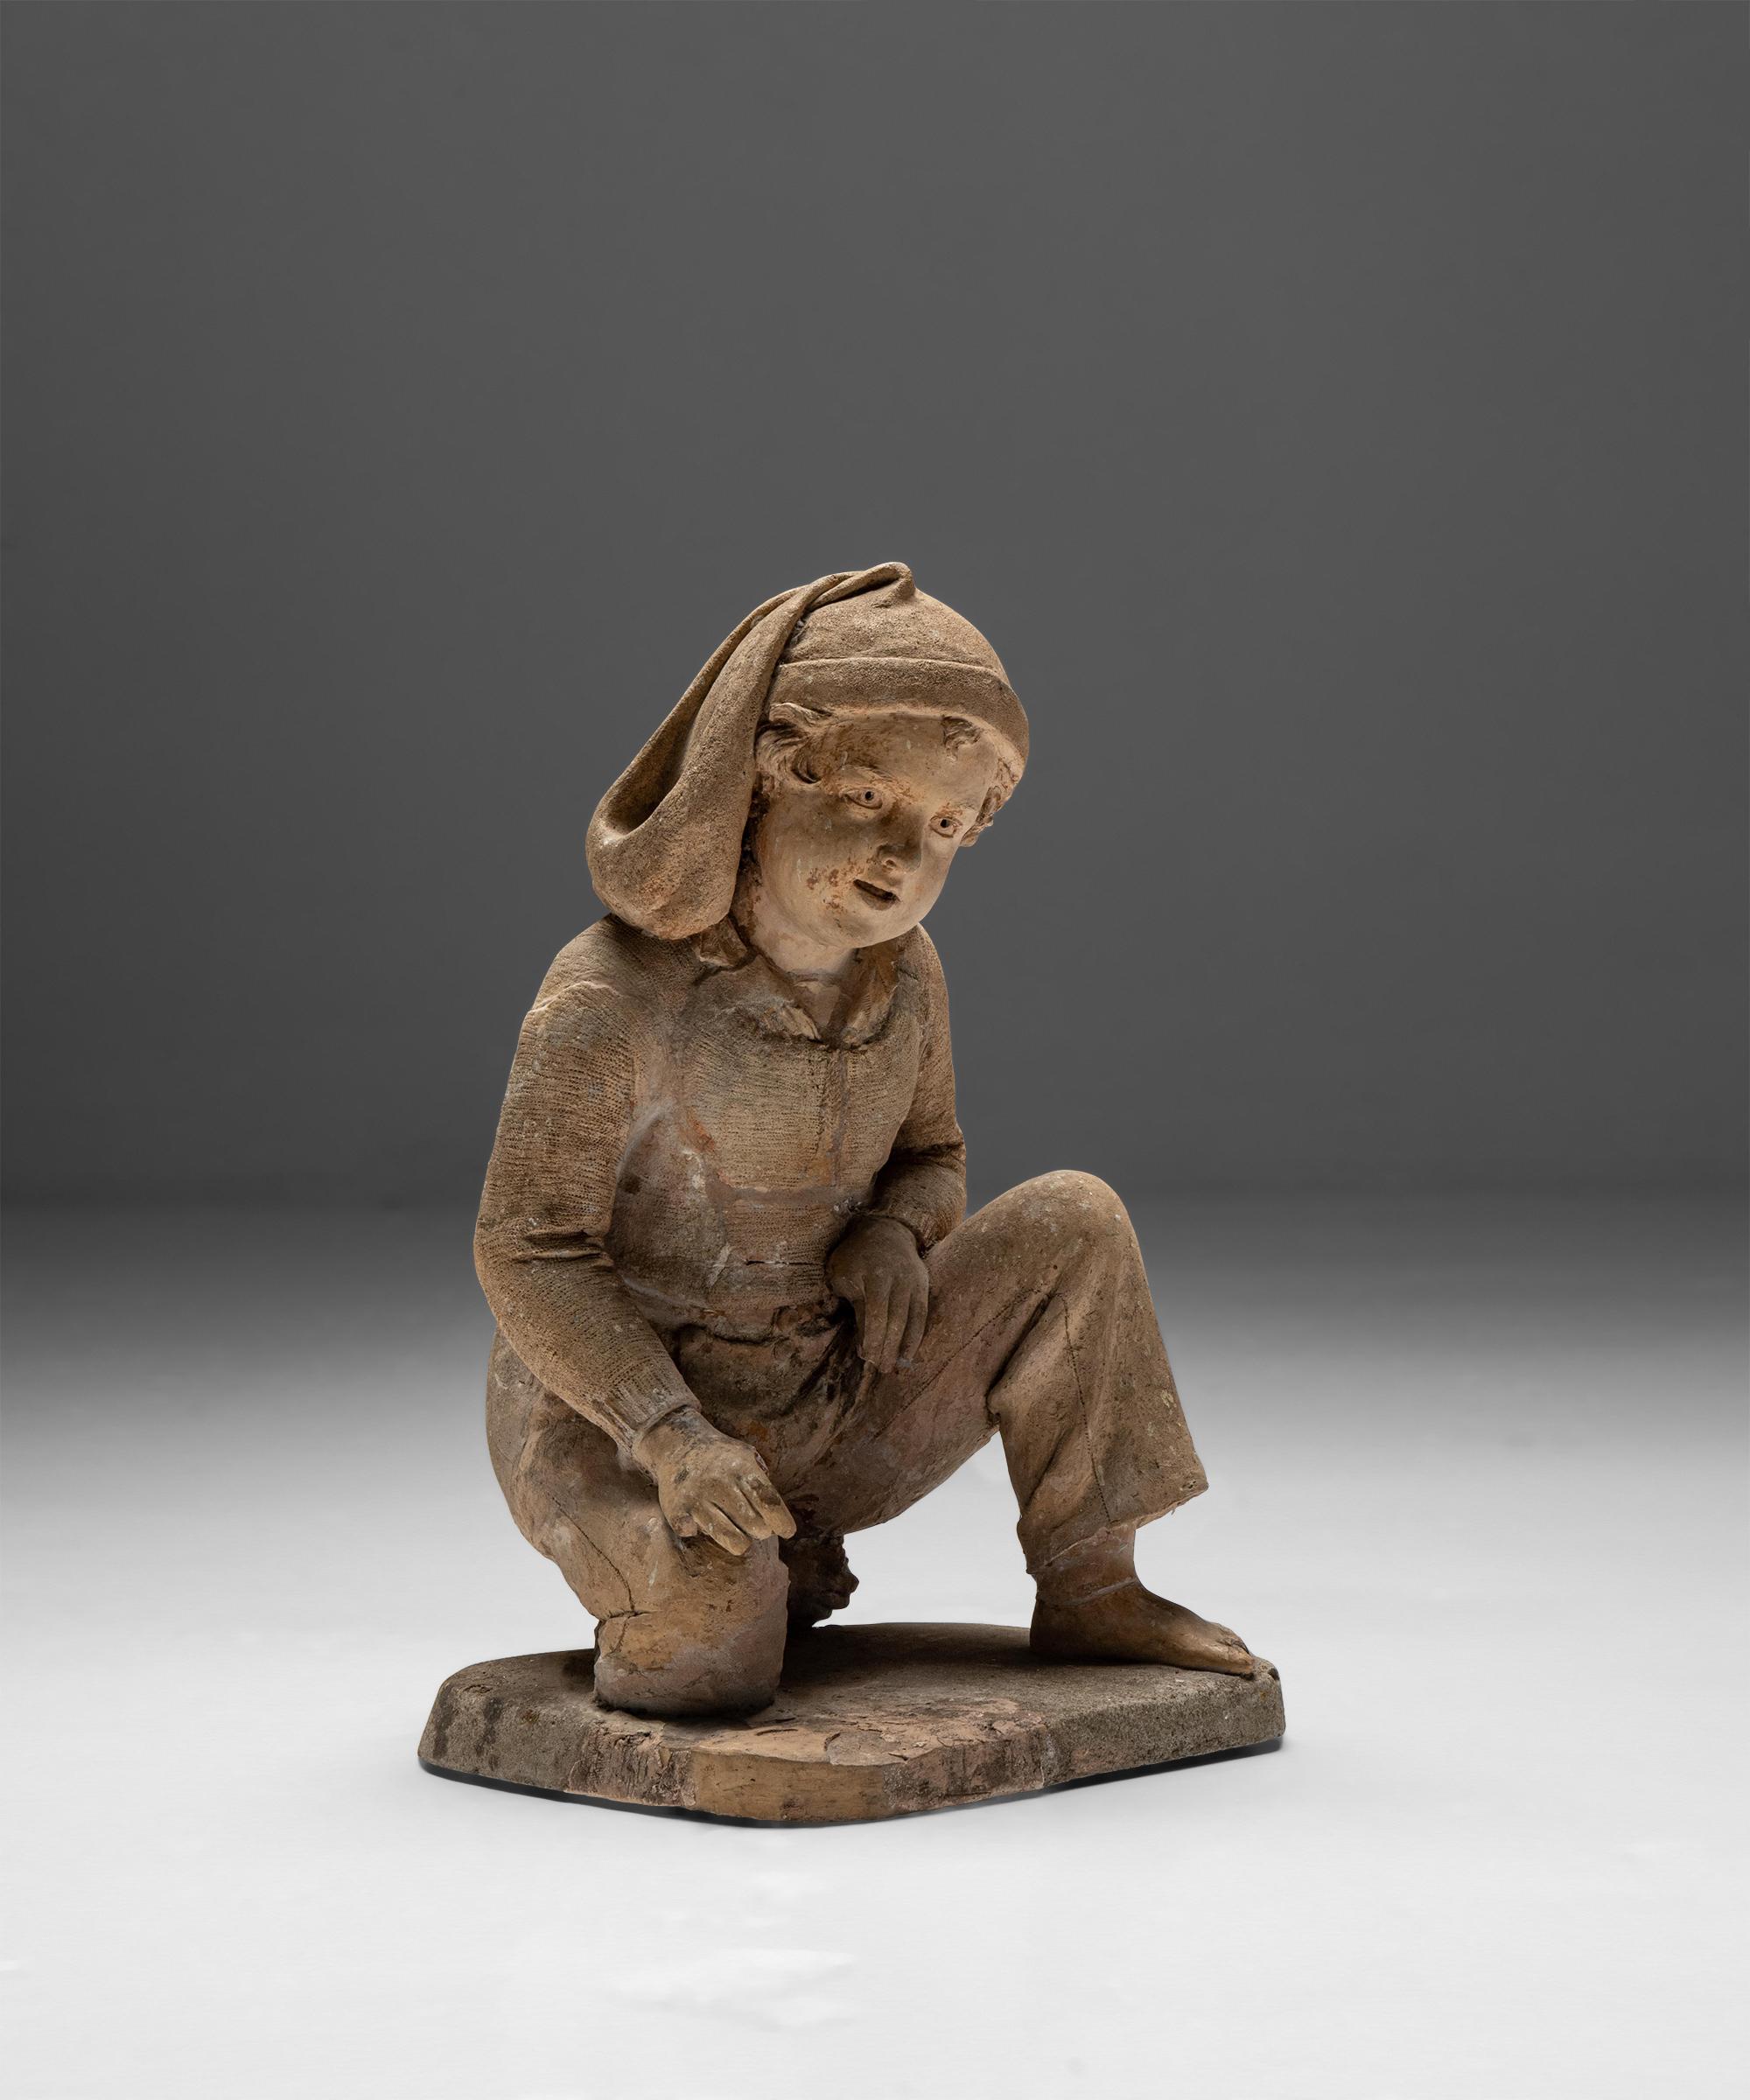 Terracotta Sculpture of a Young Fisherman Playing Marbles, France 1858.

In original condition with beautiful patina, signed E. Blot.